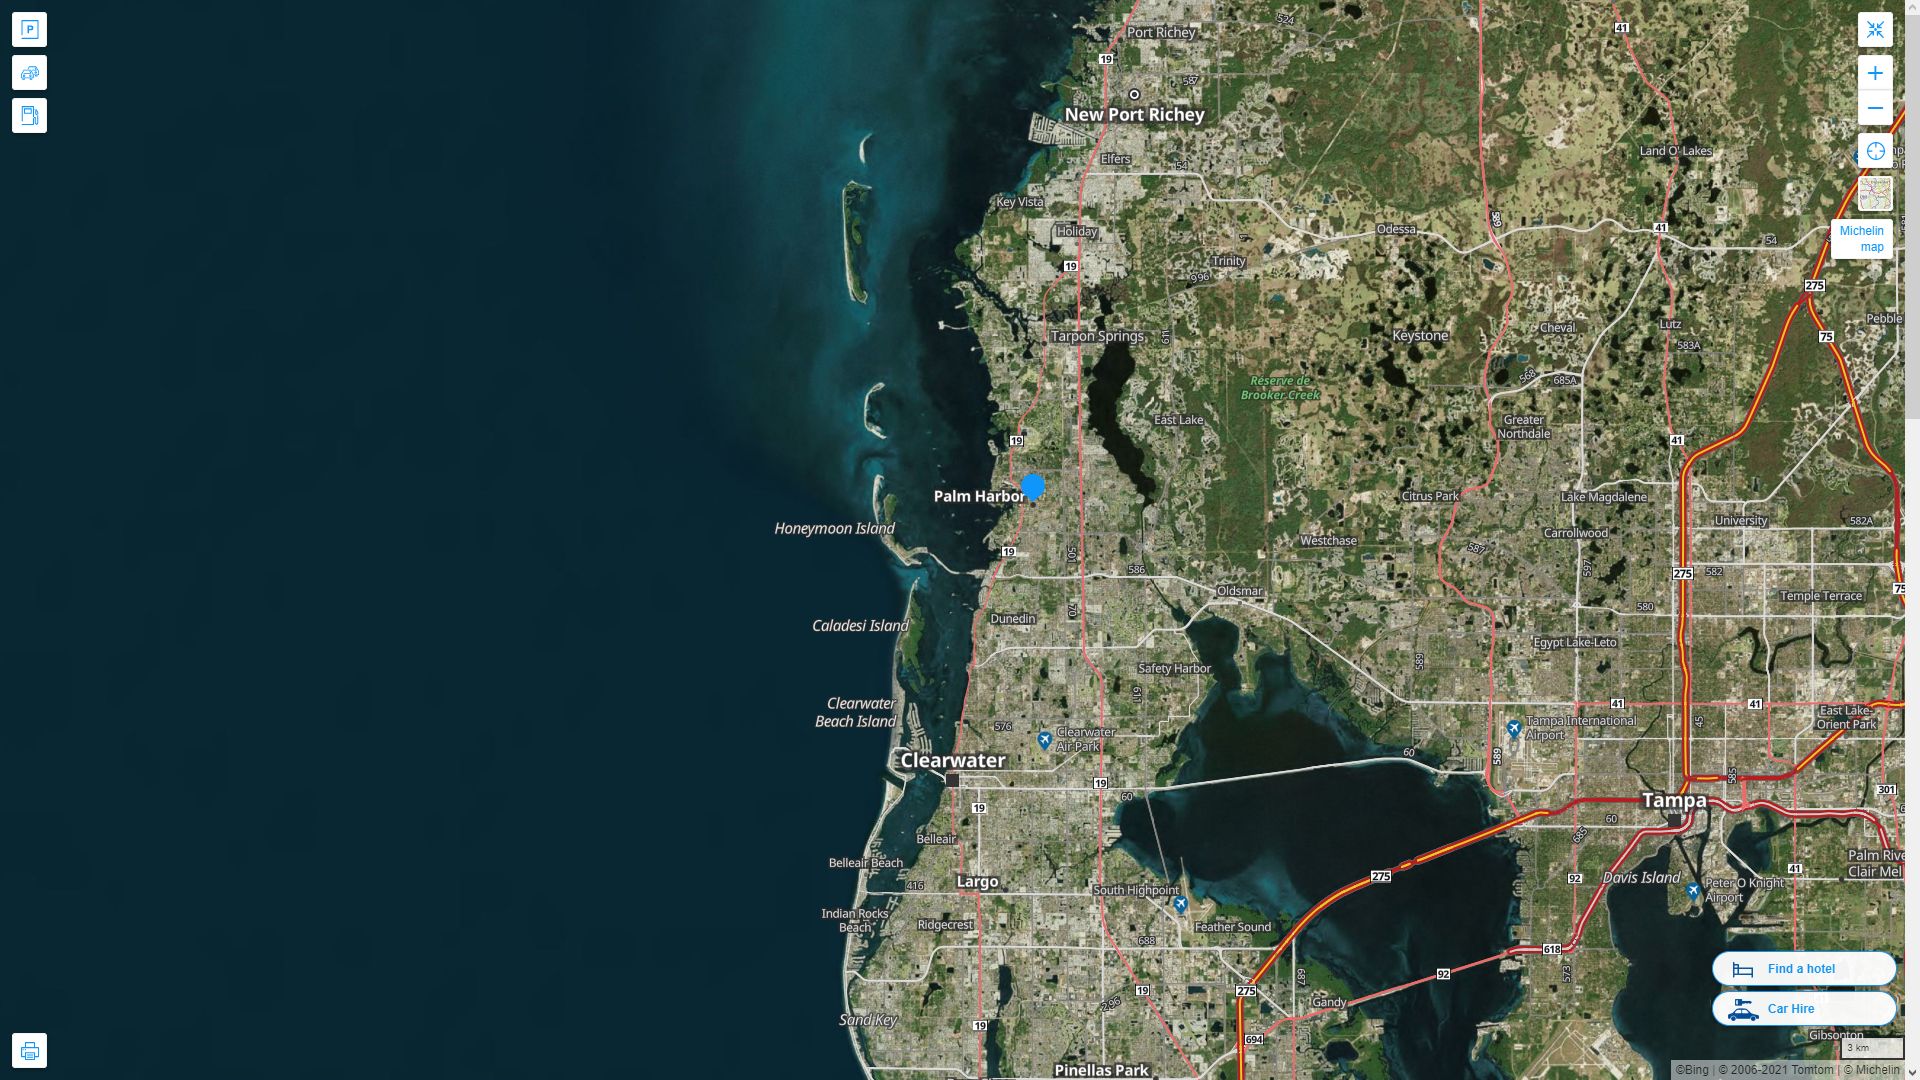 Palm Harbor Florida Highway and Road Map with Satellite View